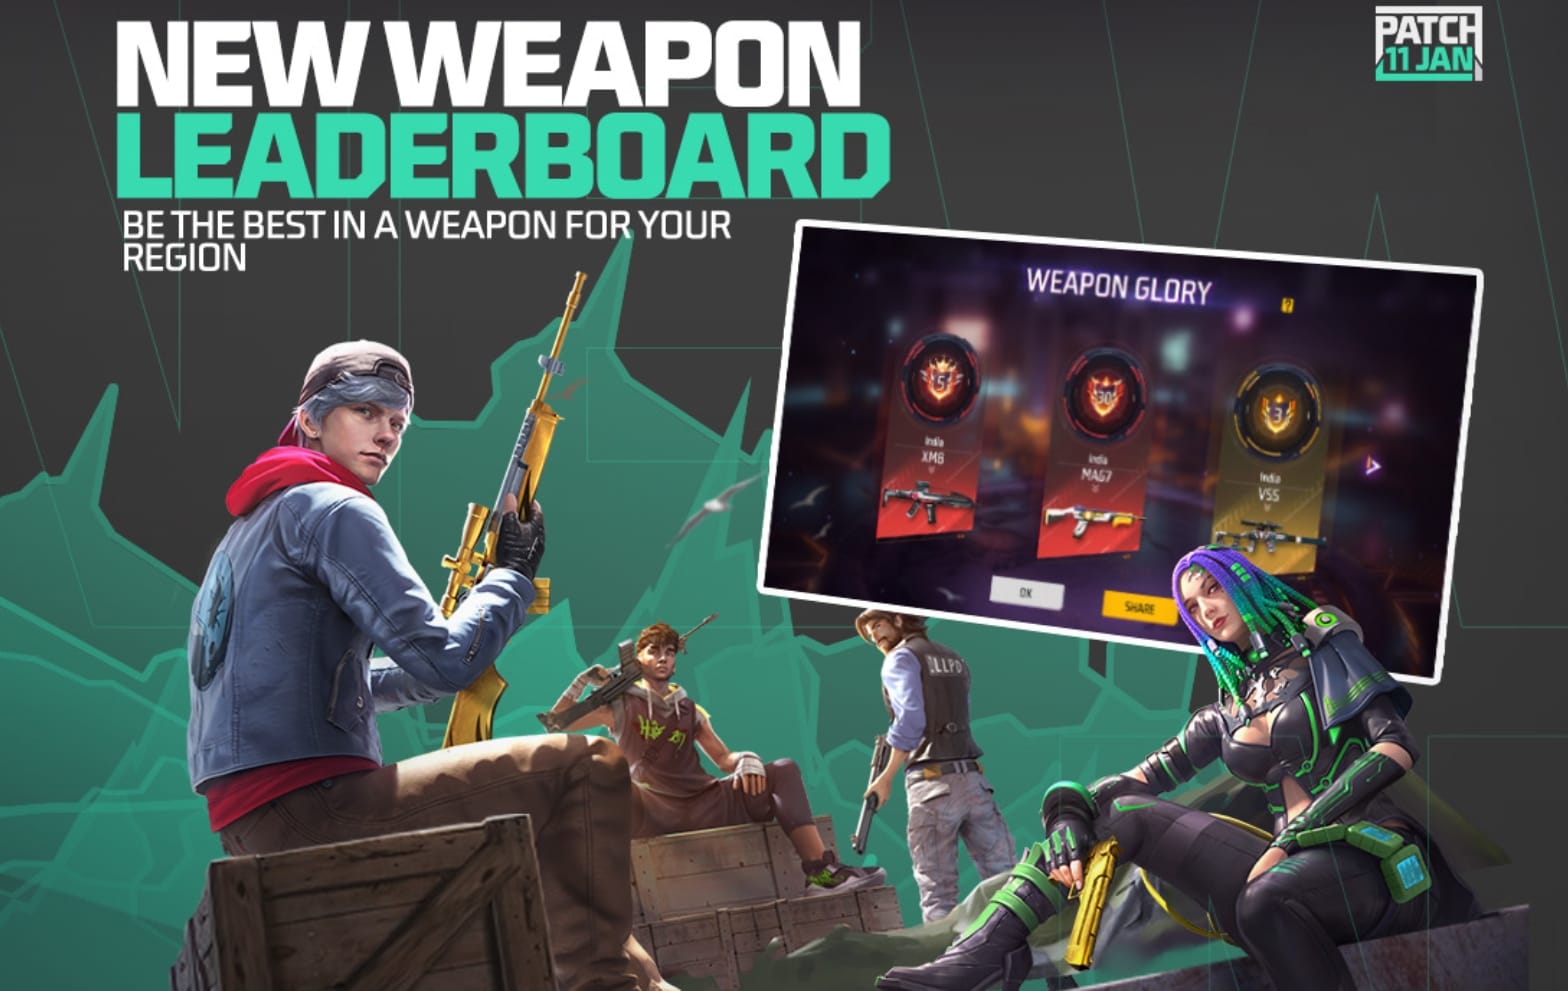 Free Fire OB38 Update apk Download: Check out the latest apk version of Garena Free Fire for the Indian server, ALL DETAILS